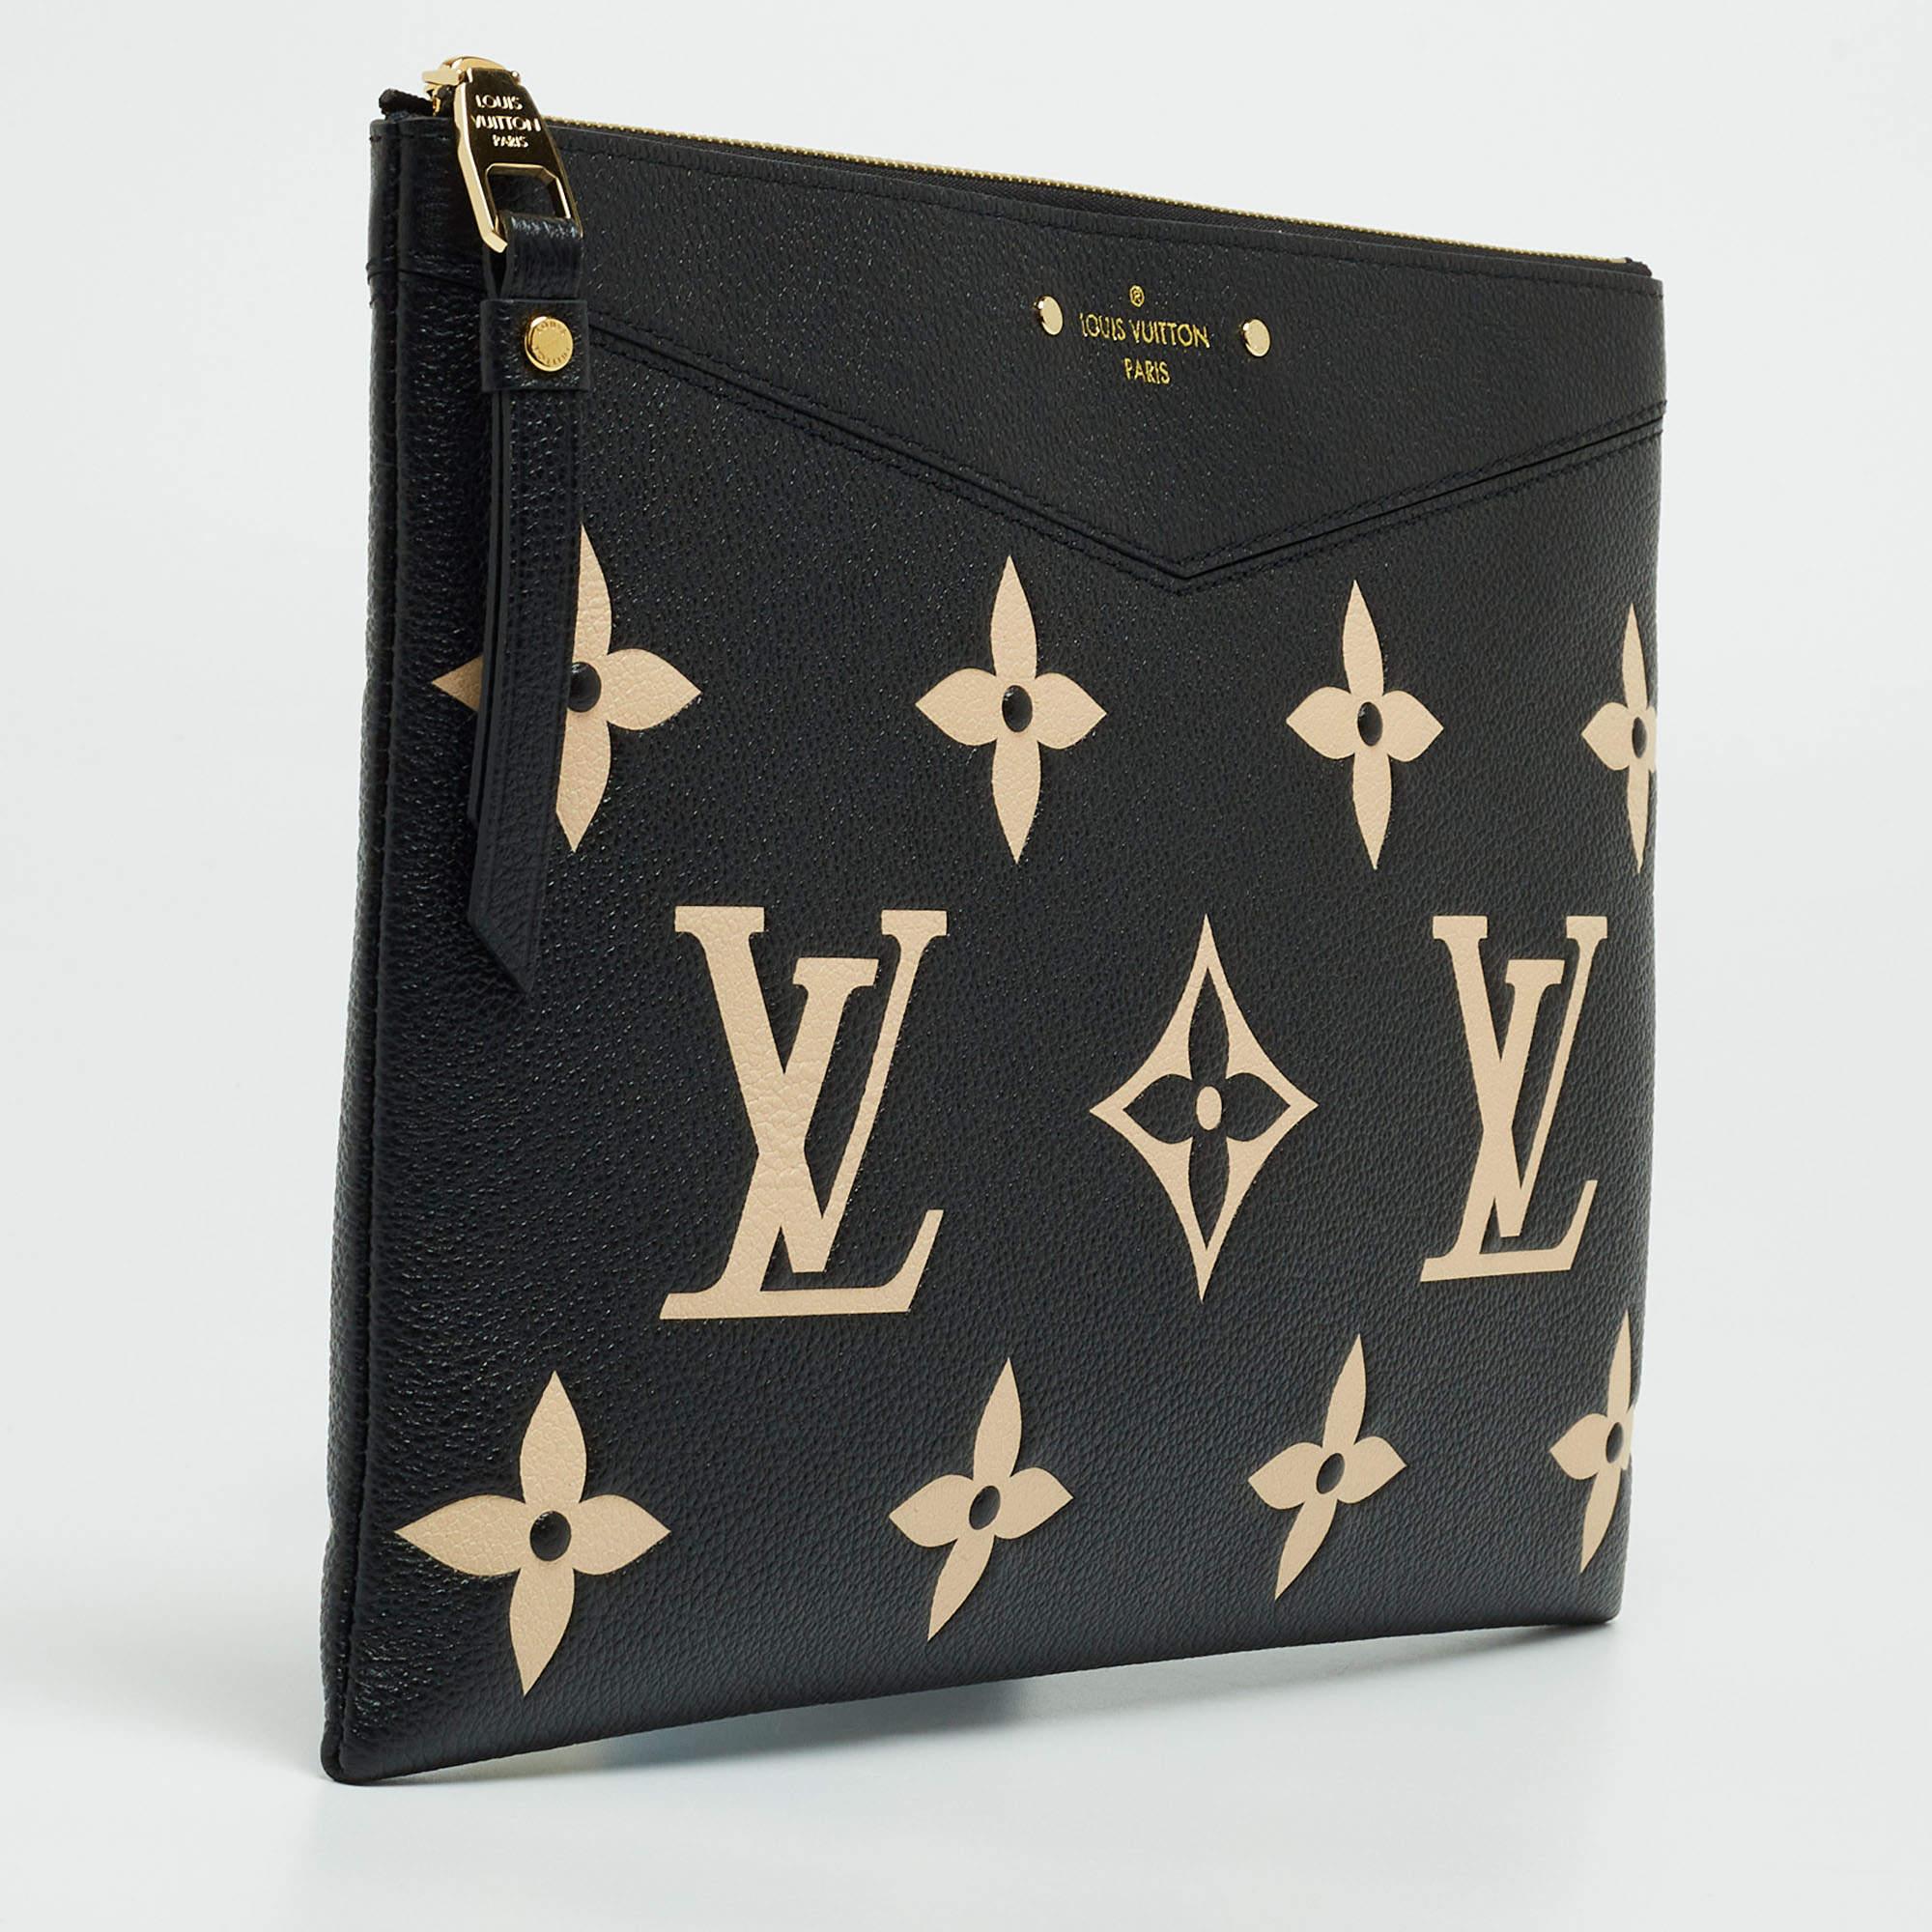 Carry everything you need in style thanks to this LV pouch. Crafted from the best materials, this is an accessory that promises enduring style and usage.

Includes: Original Dustbag, Original Box, Receipt

